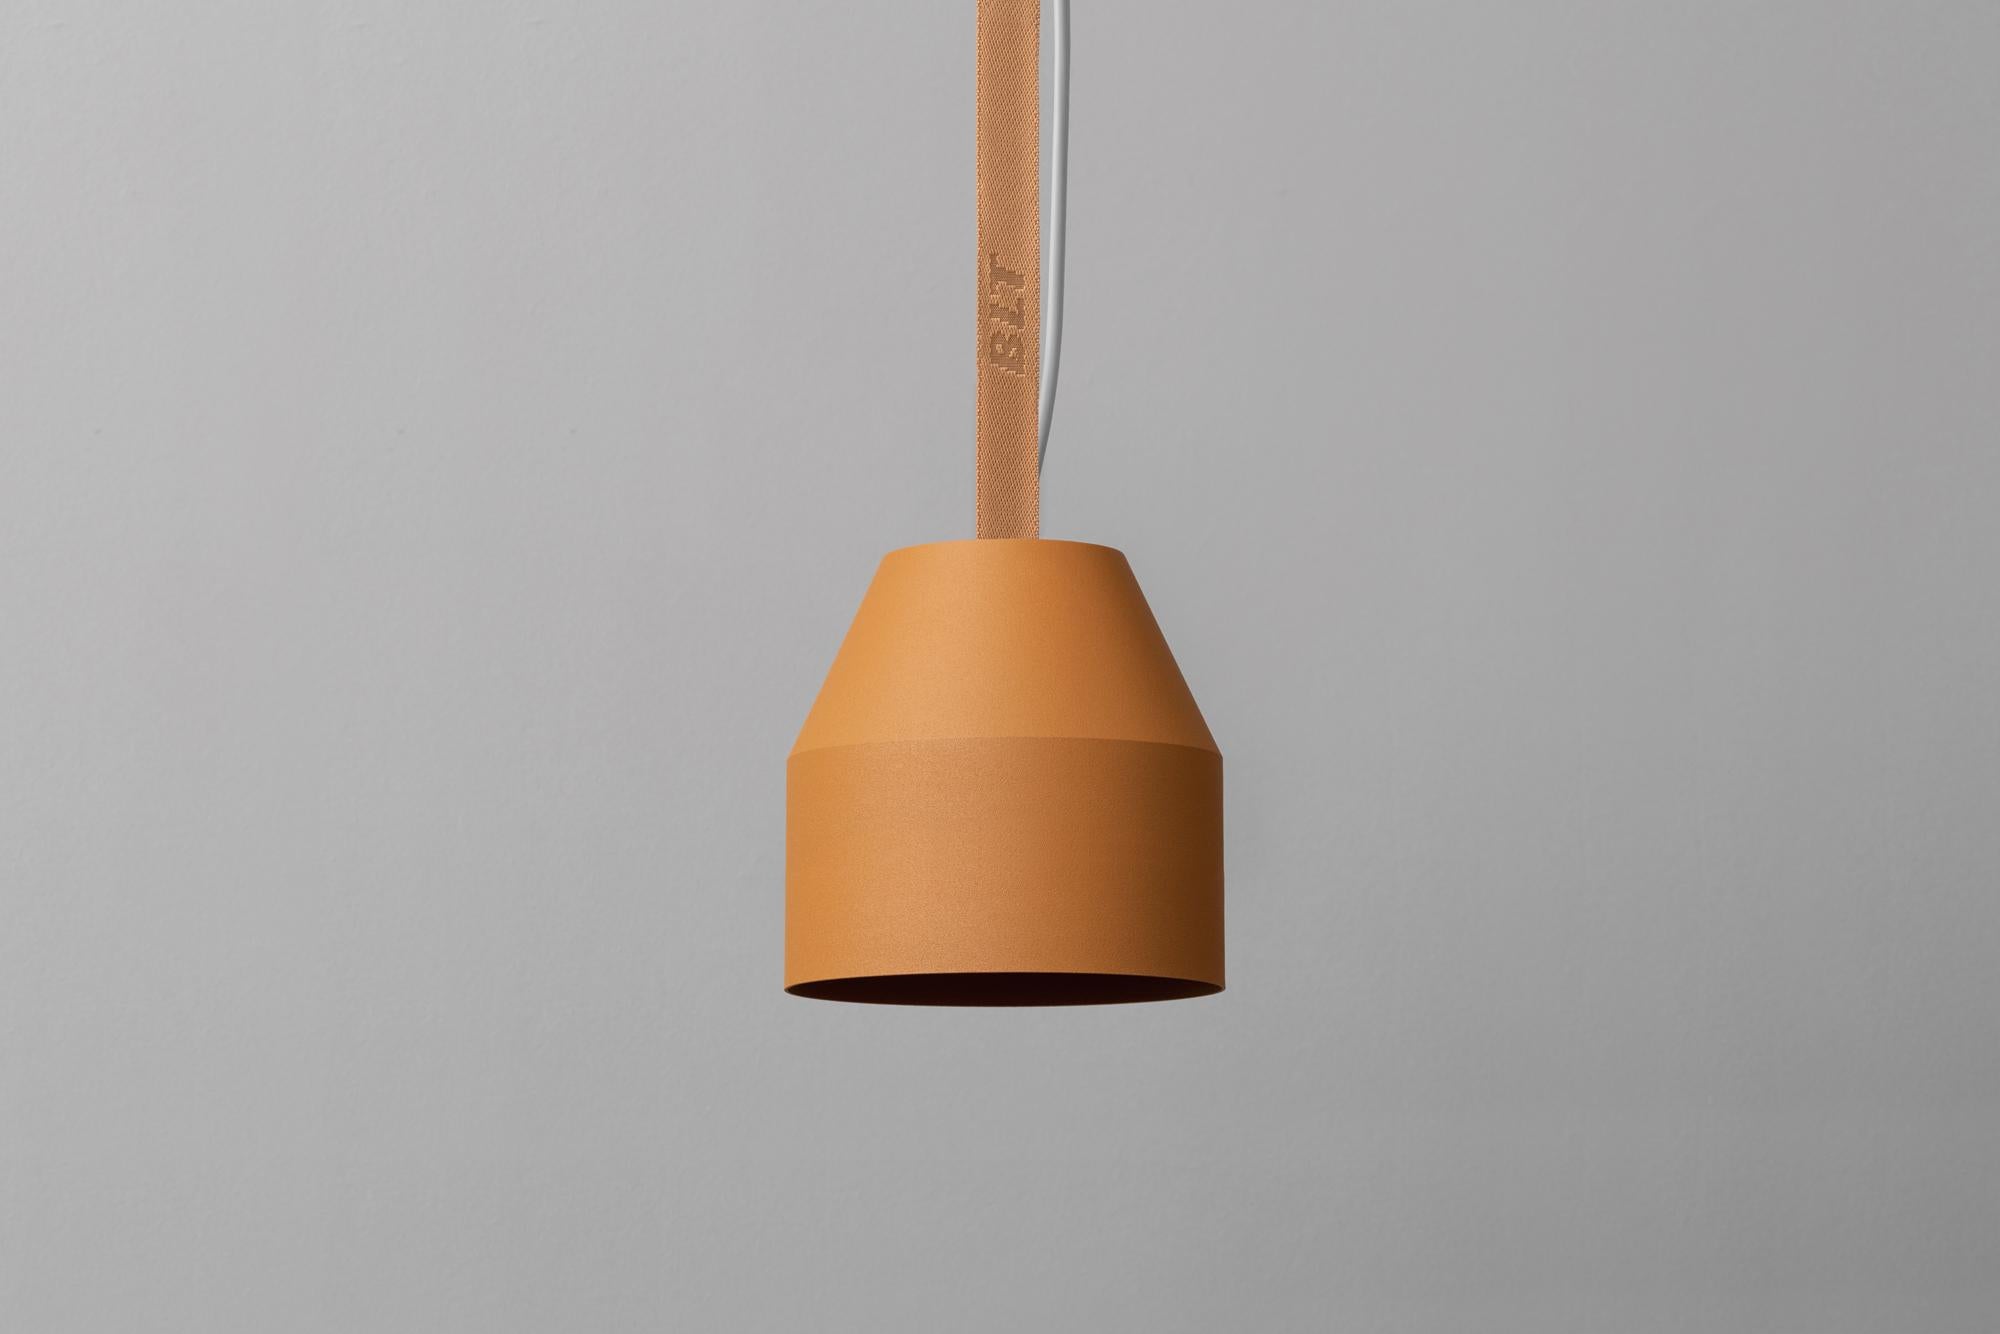 BLT_CAP Big Almond Pendant Lamp by +kouple
Dimensions: Ø 16 x H 16,5 cm. 
Materials: Powder-coated steel and textile.

Available in different color options. The rod length is 250 cm. Please contact us.

All our lamps can be wired according to each